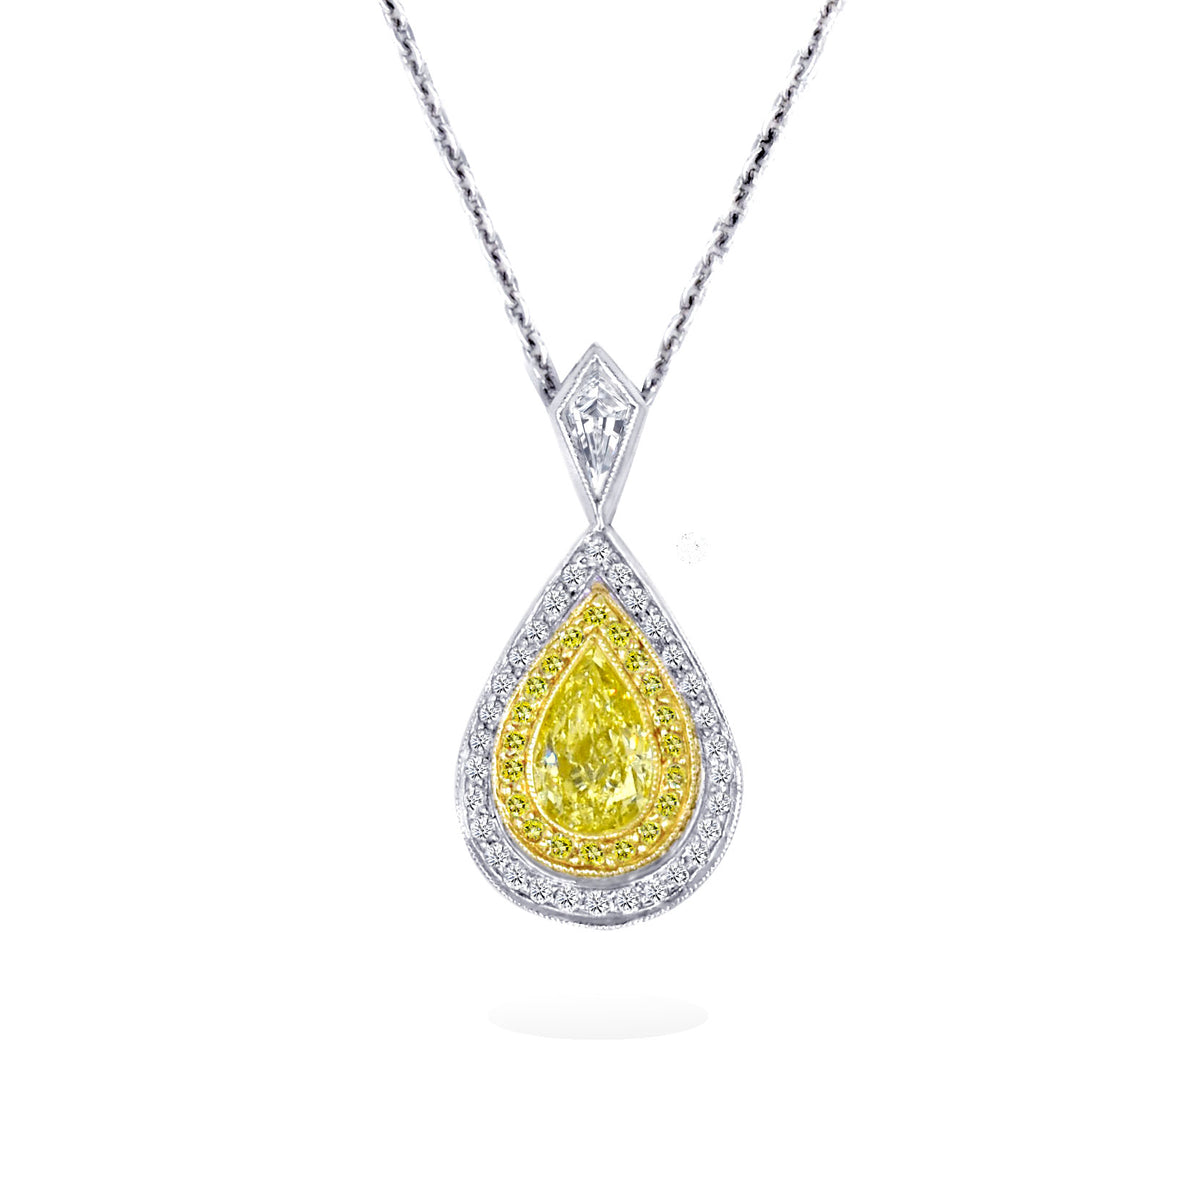 JB Star Platinum and 18K Yellow Gold Pear Shaped Pendant with a Yellow Diamond